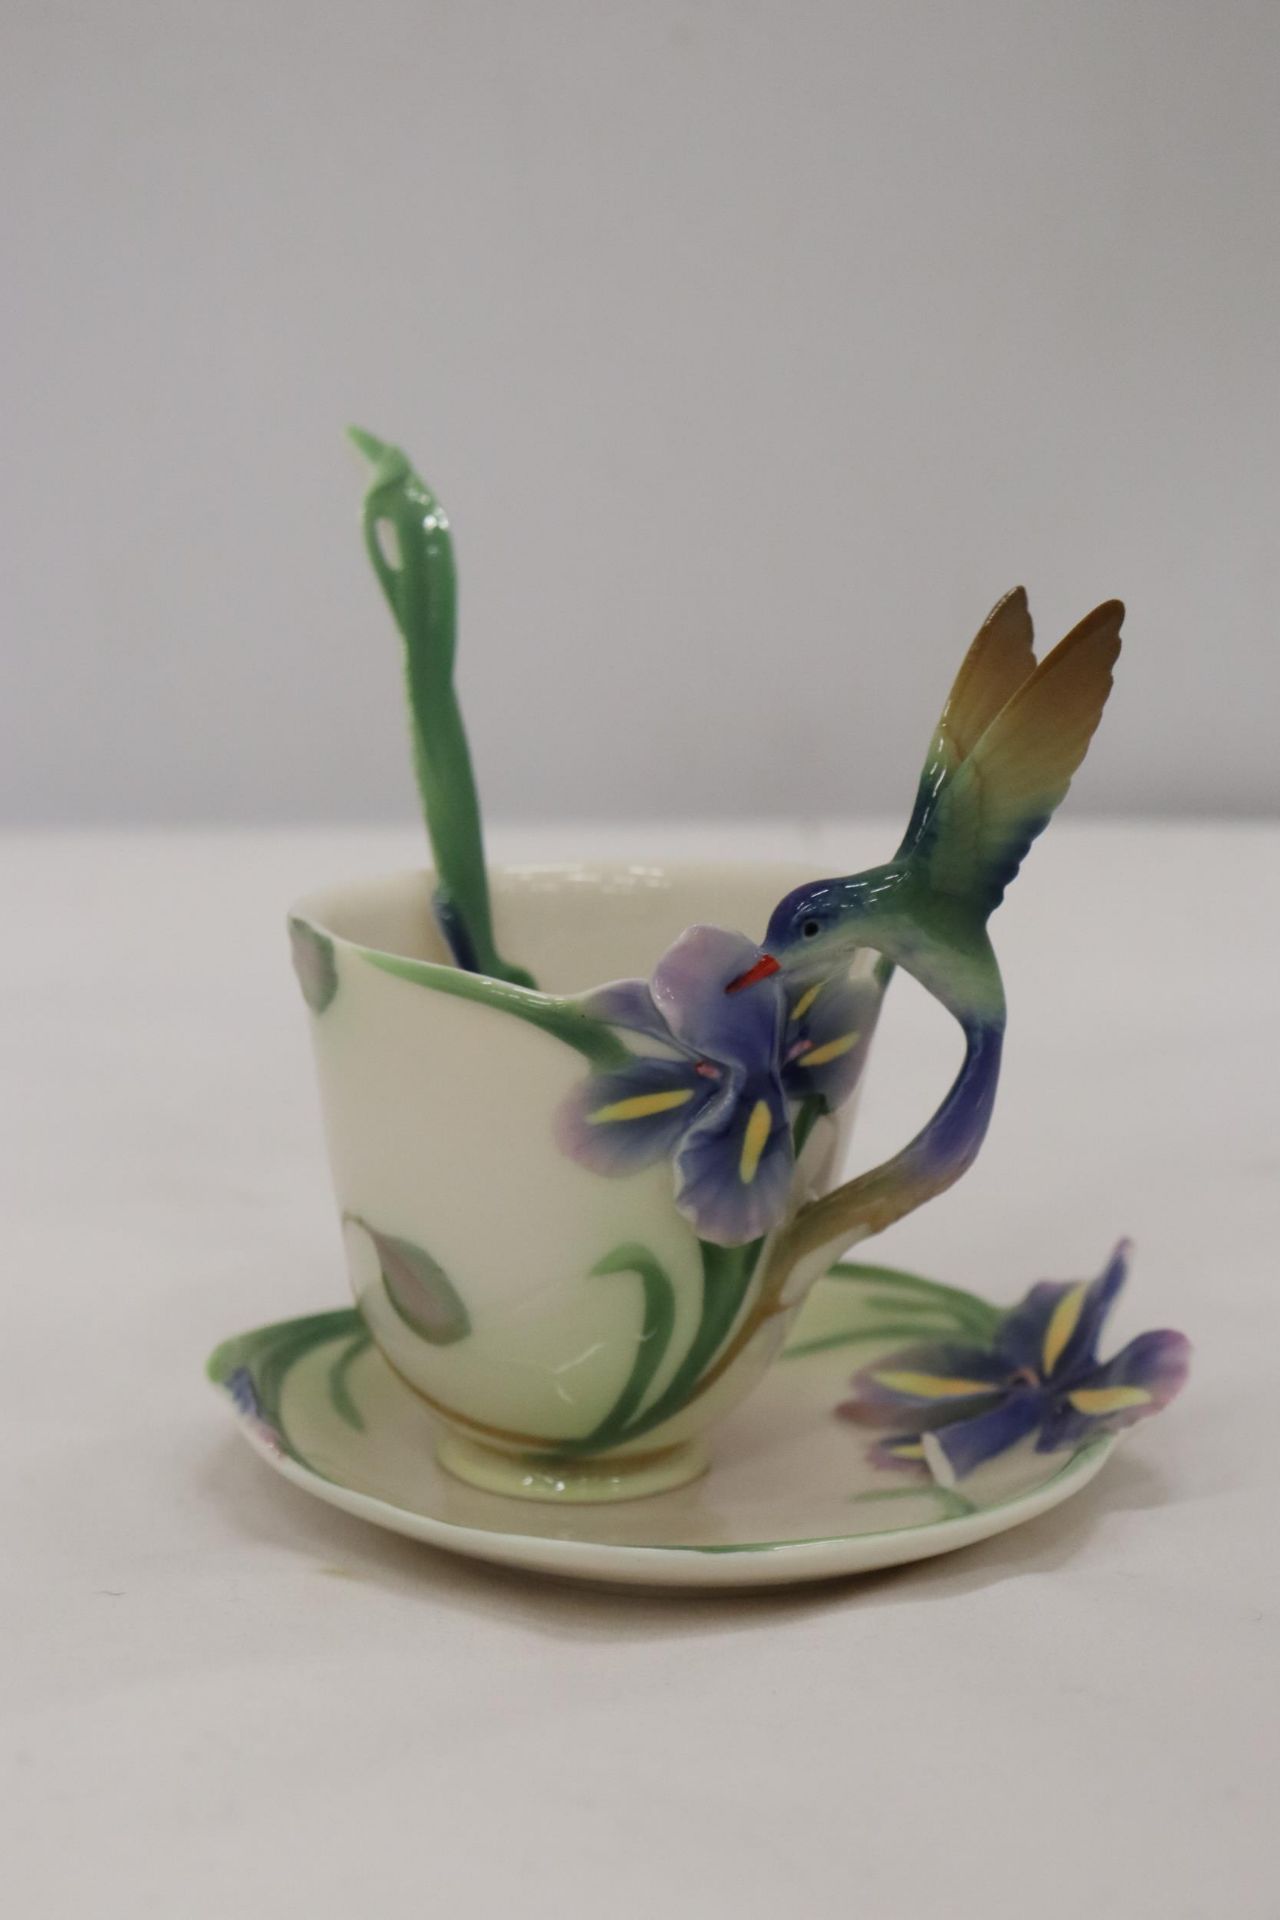 A FRANZ PORCELAIN CUP, SAUCER AND SPOON SET WITH HUMMING BIRD DESIGN. AF - CHIP TO SAUCER - Image 2 of 8